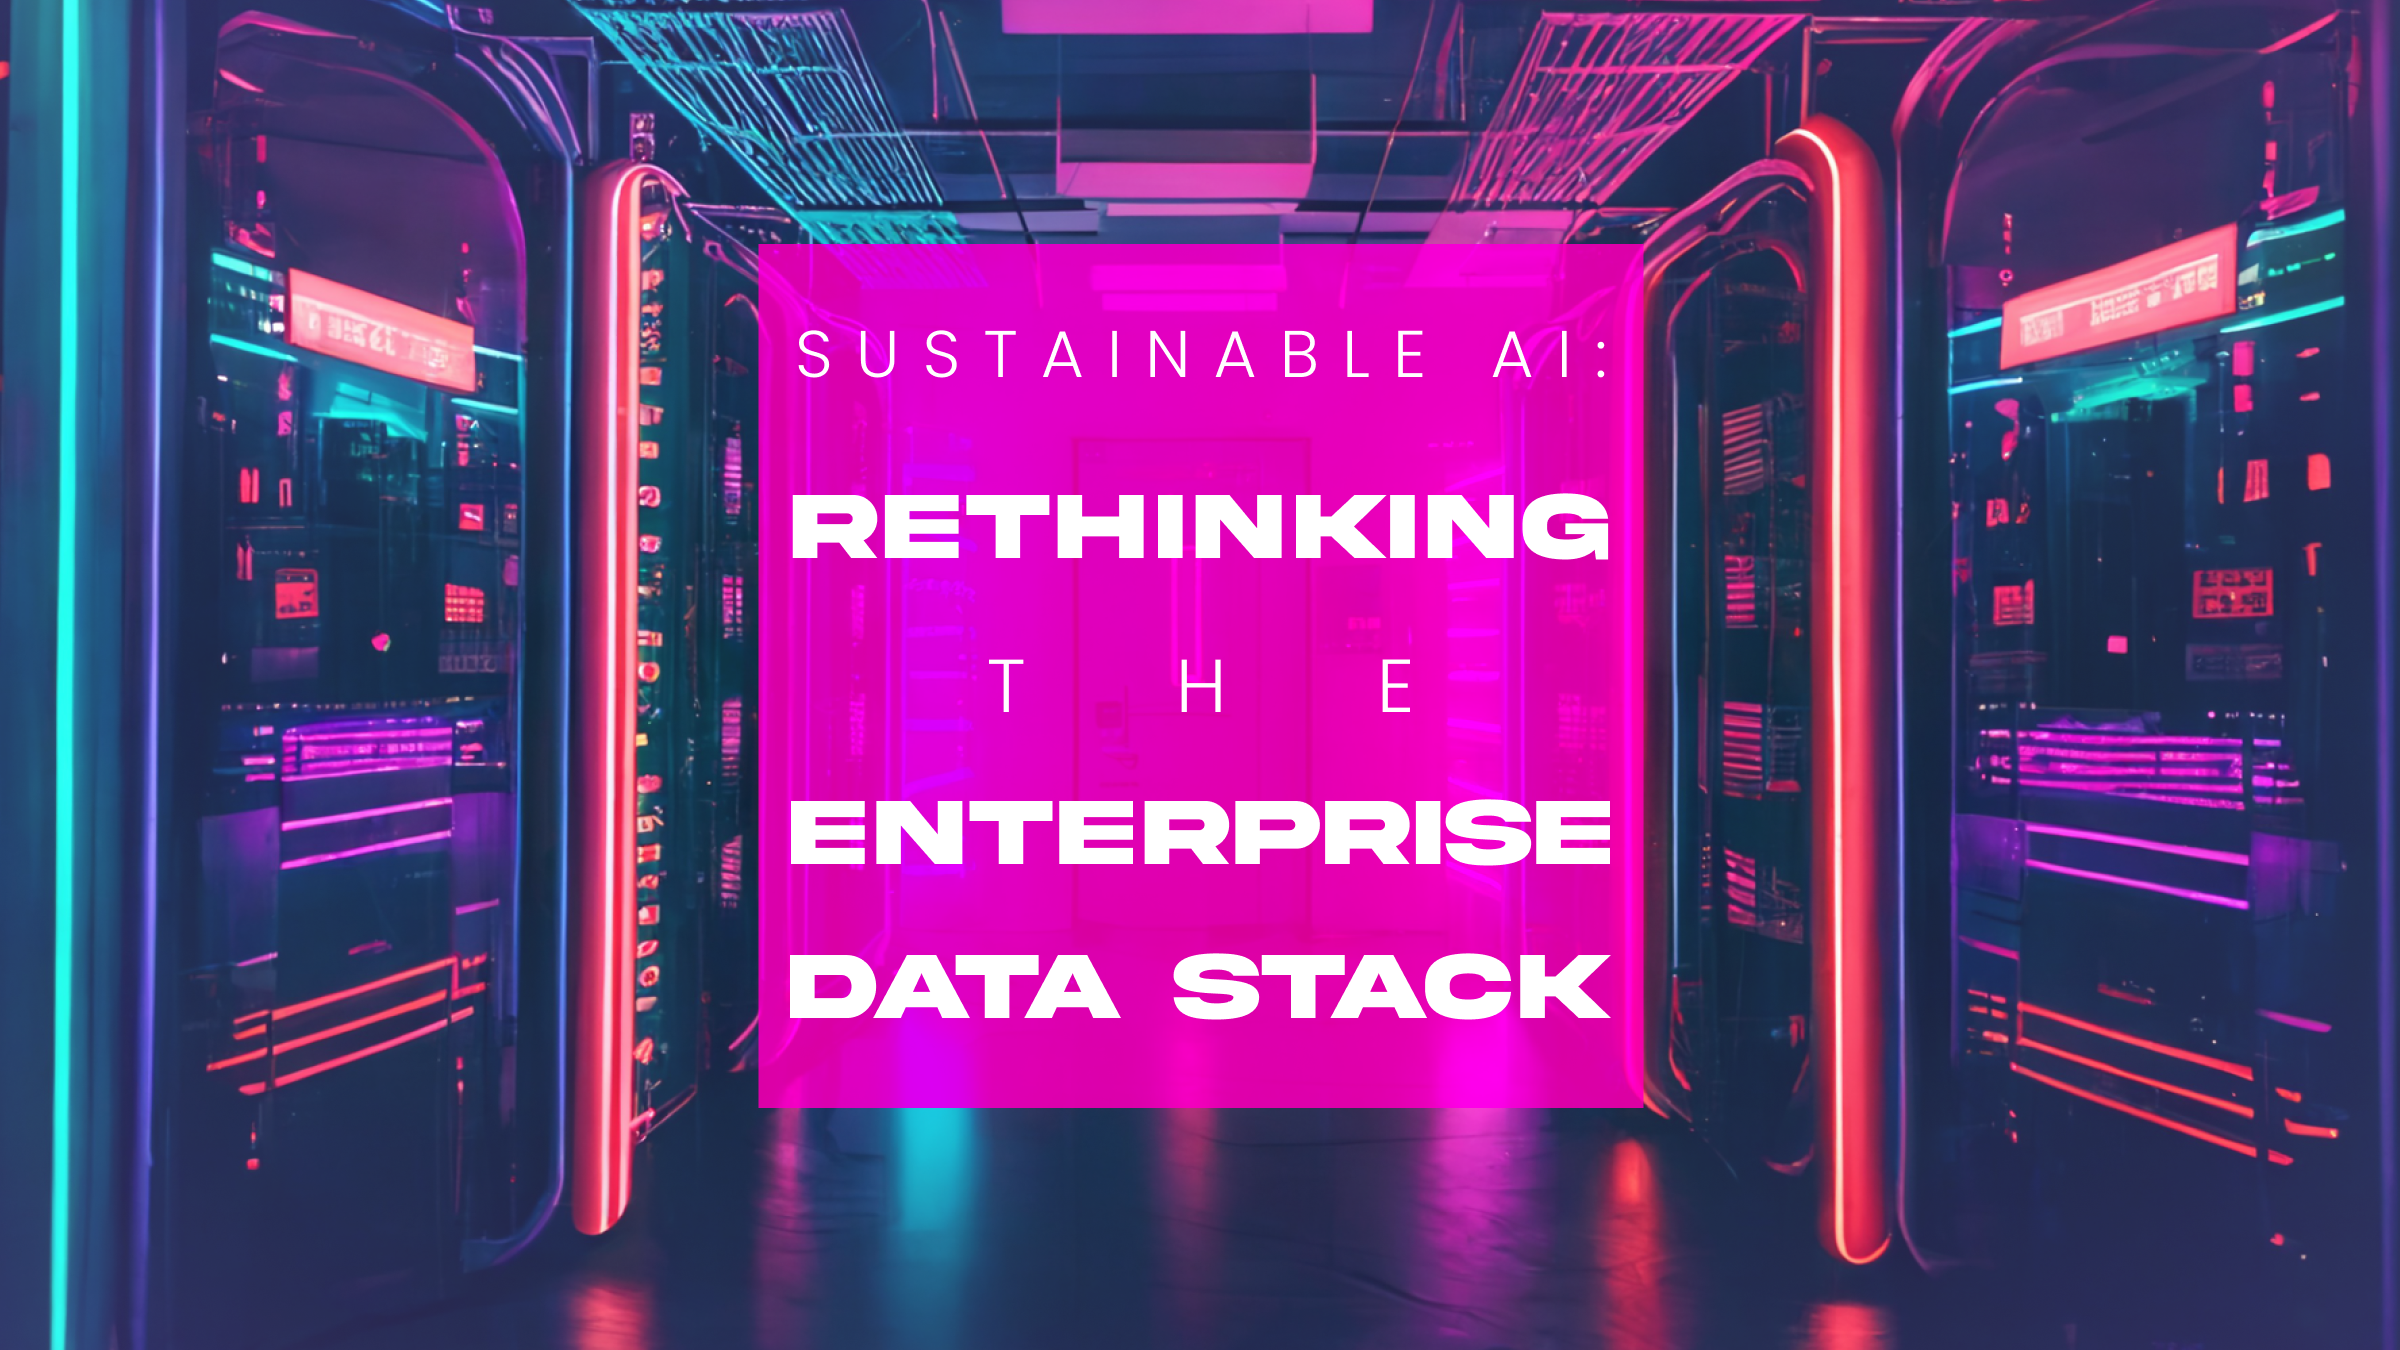 How Do We Make AI More Sustainable? Start by Rethinking the Enterprise Data Stack